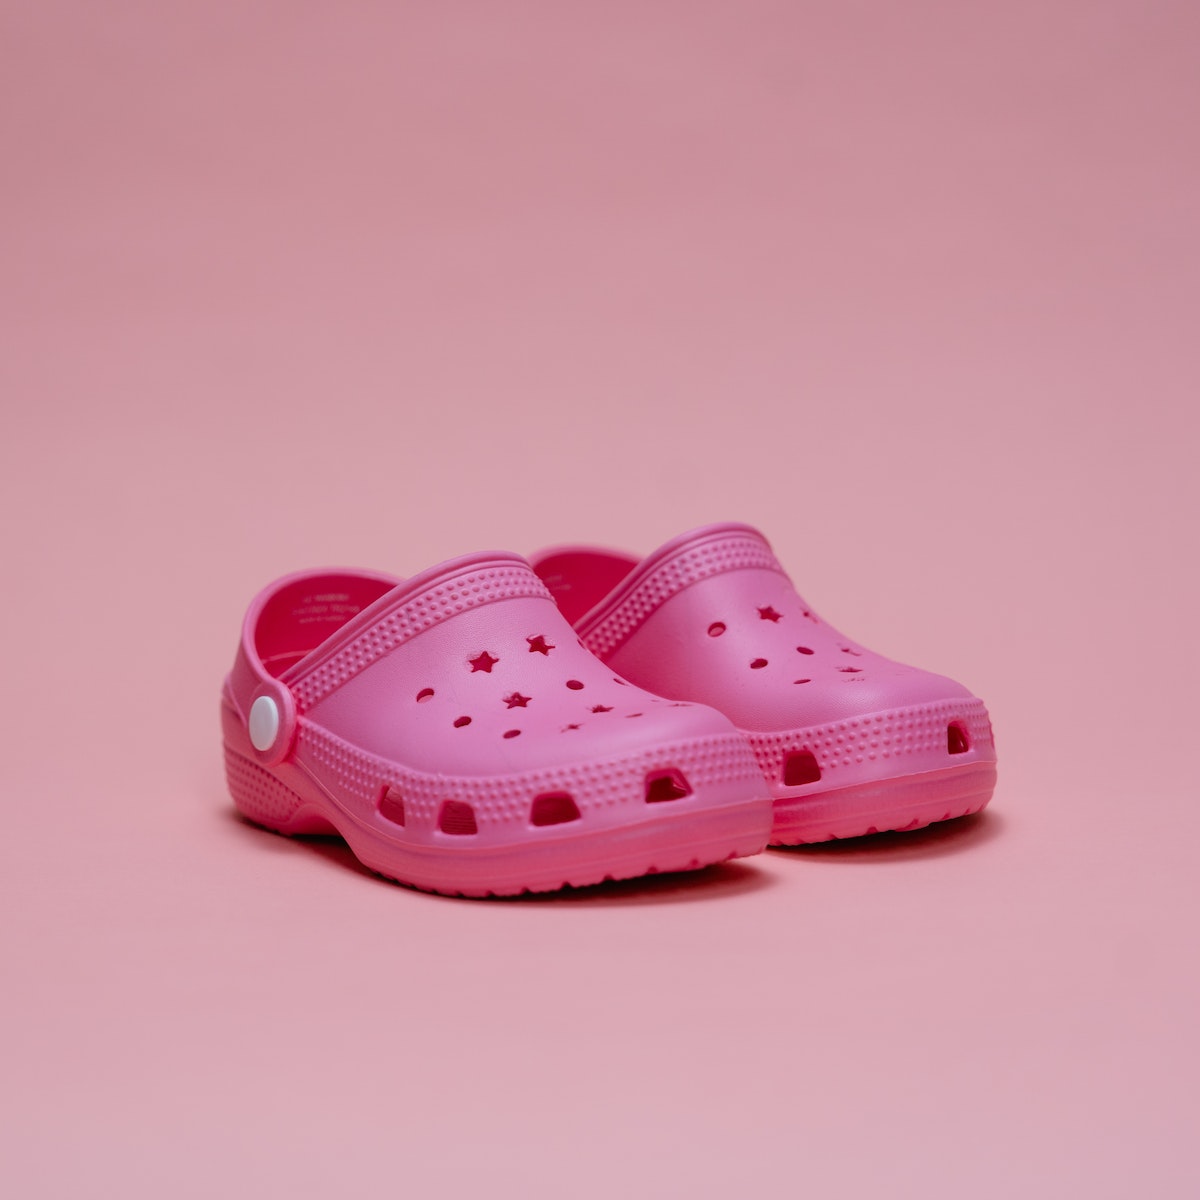 Close-up Photo of Pink Rubber Clogs